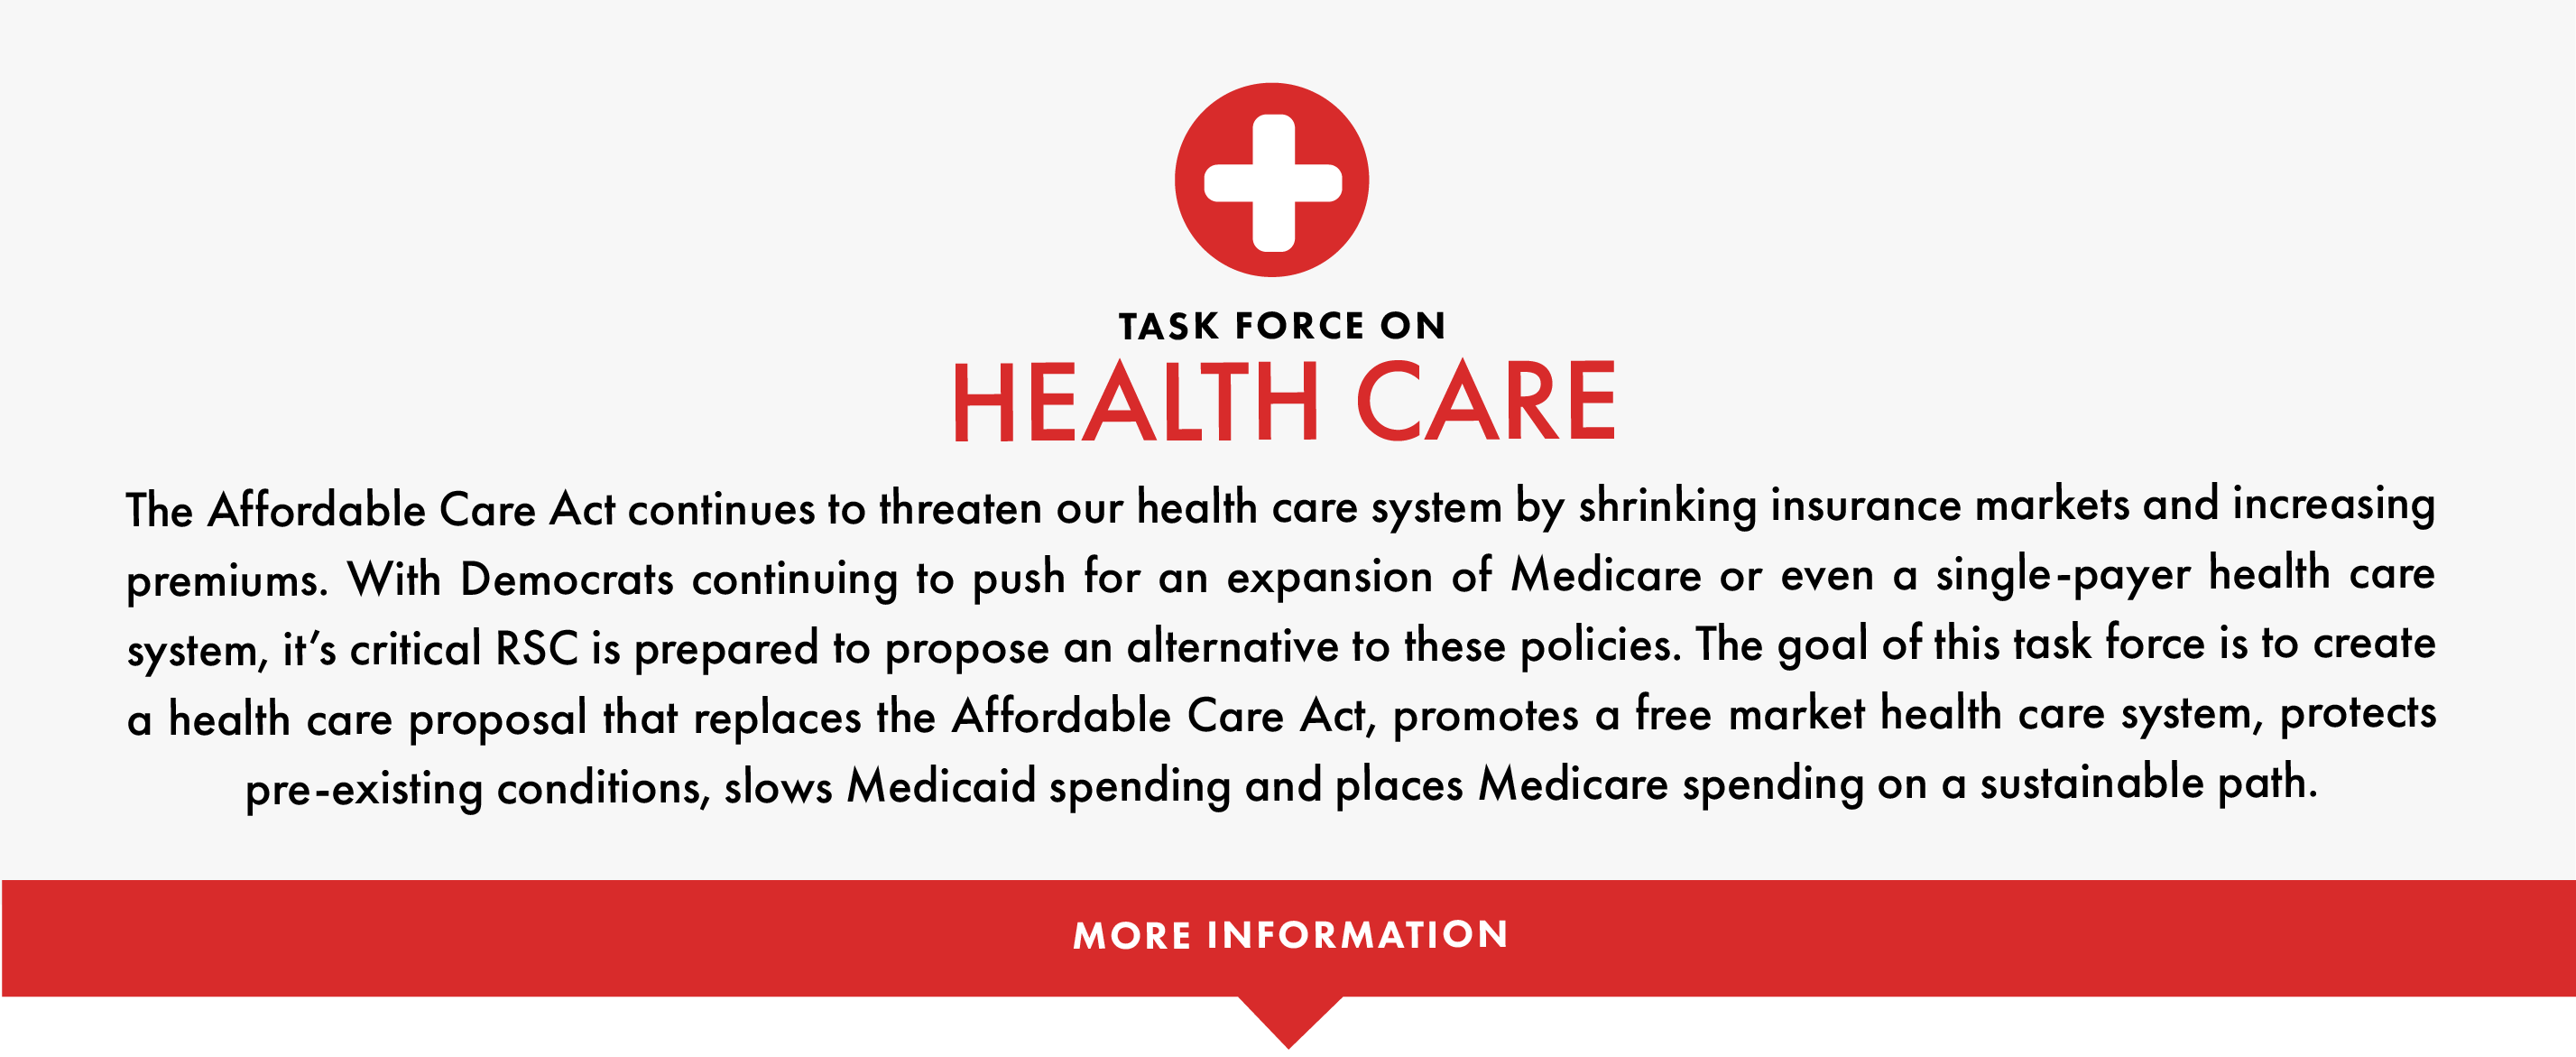 The goal of this task force is to create a health care policy to replace the Affordable Care Act.